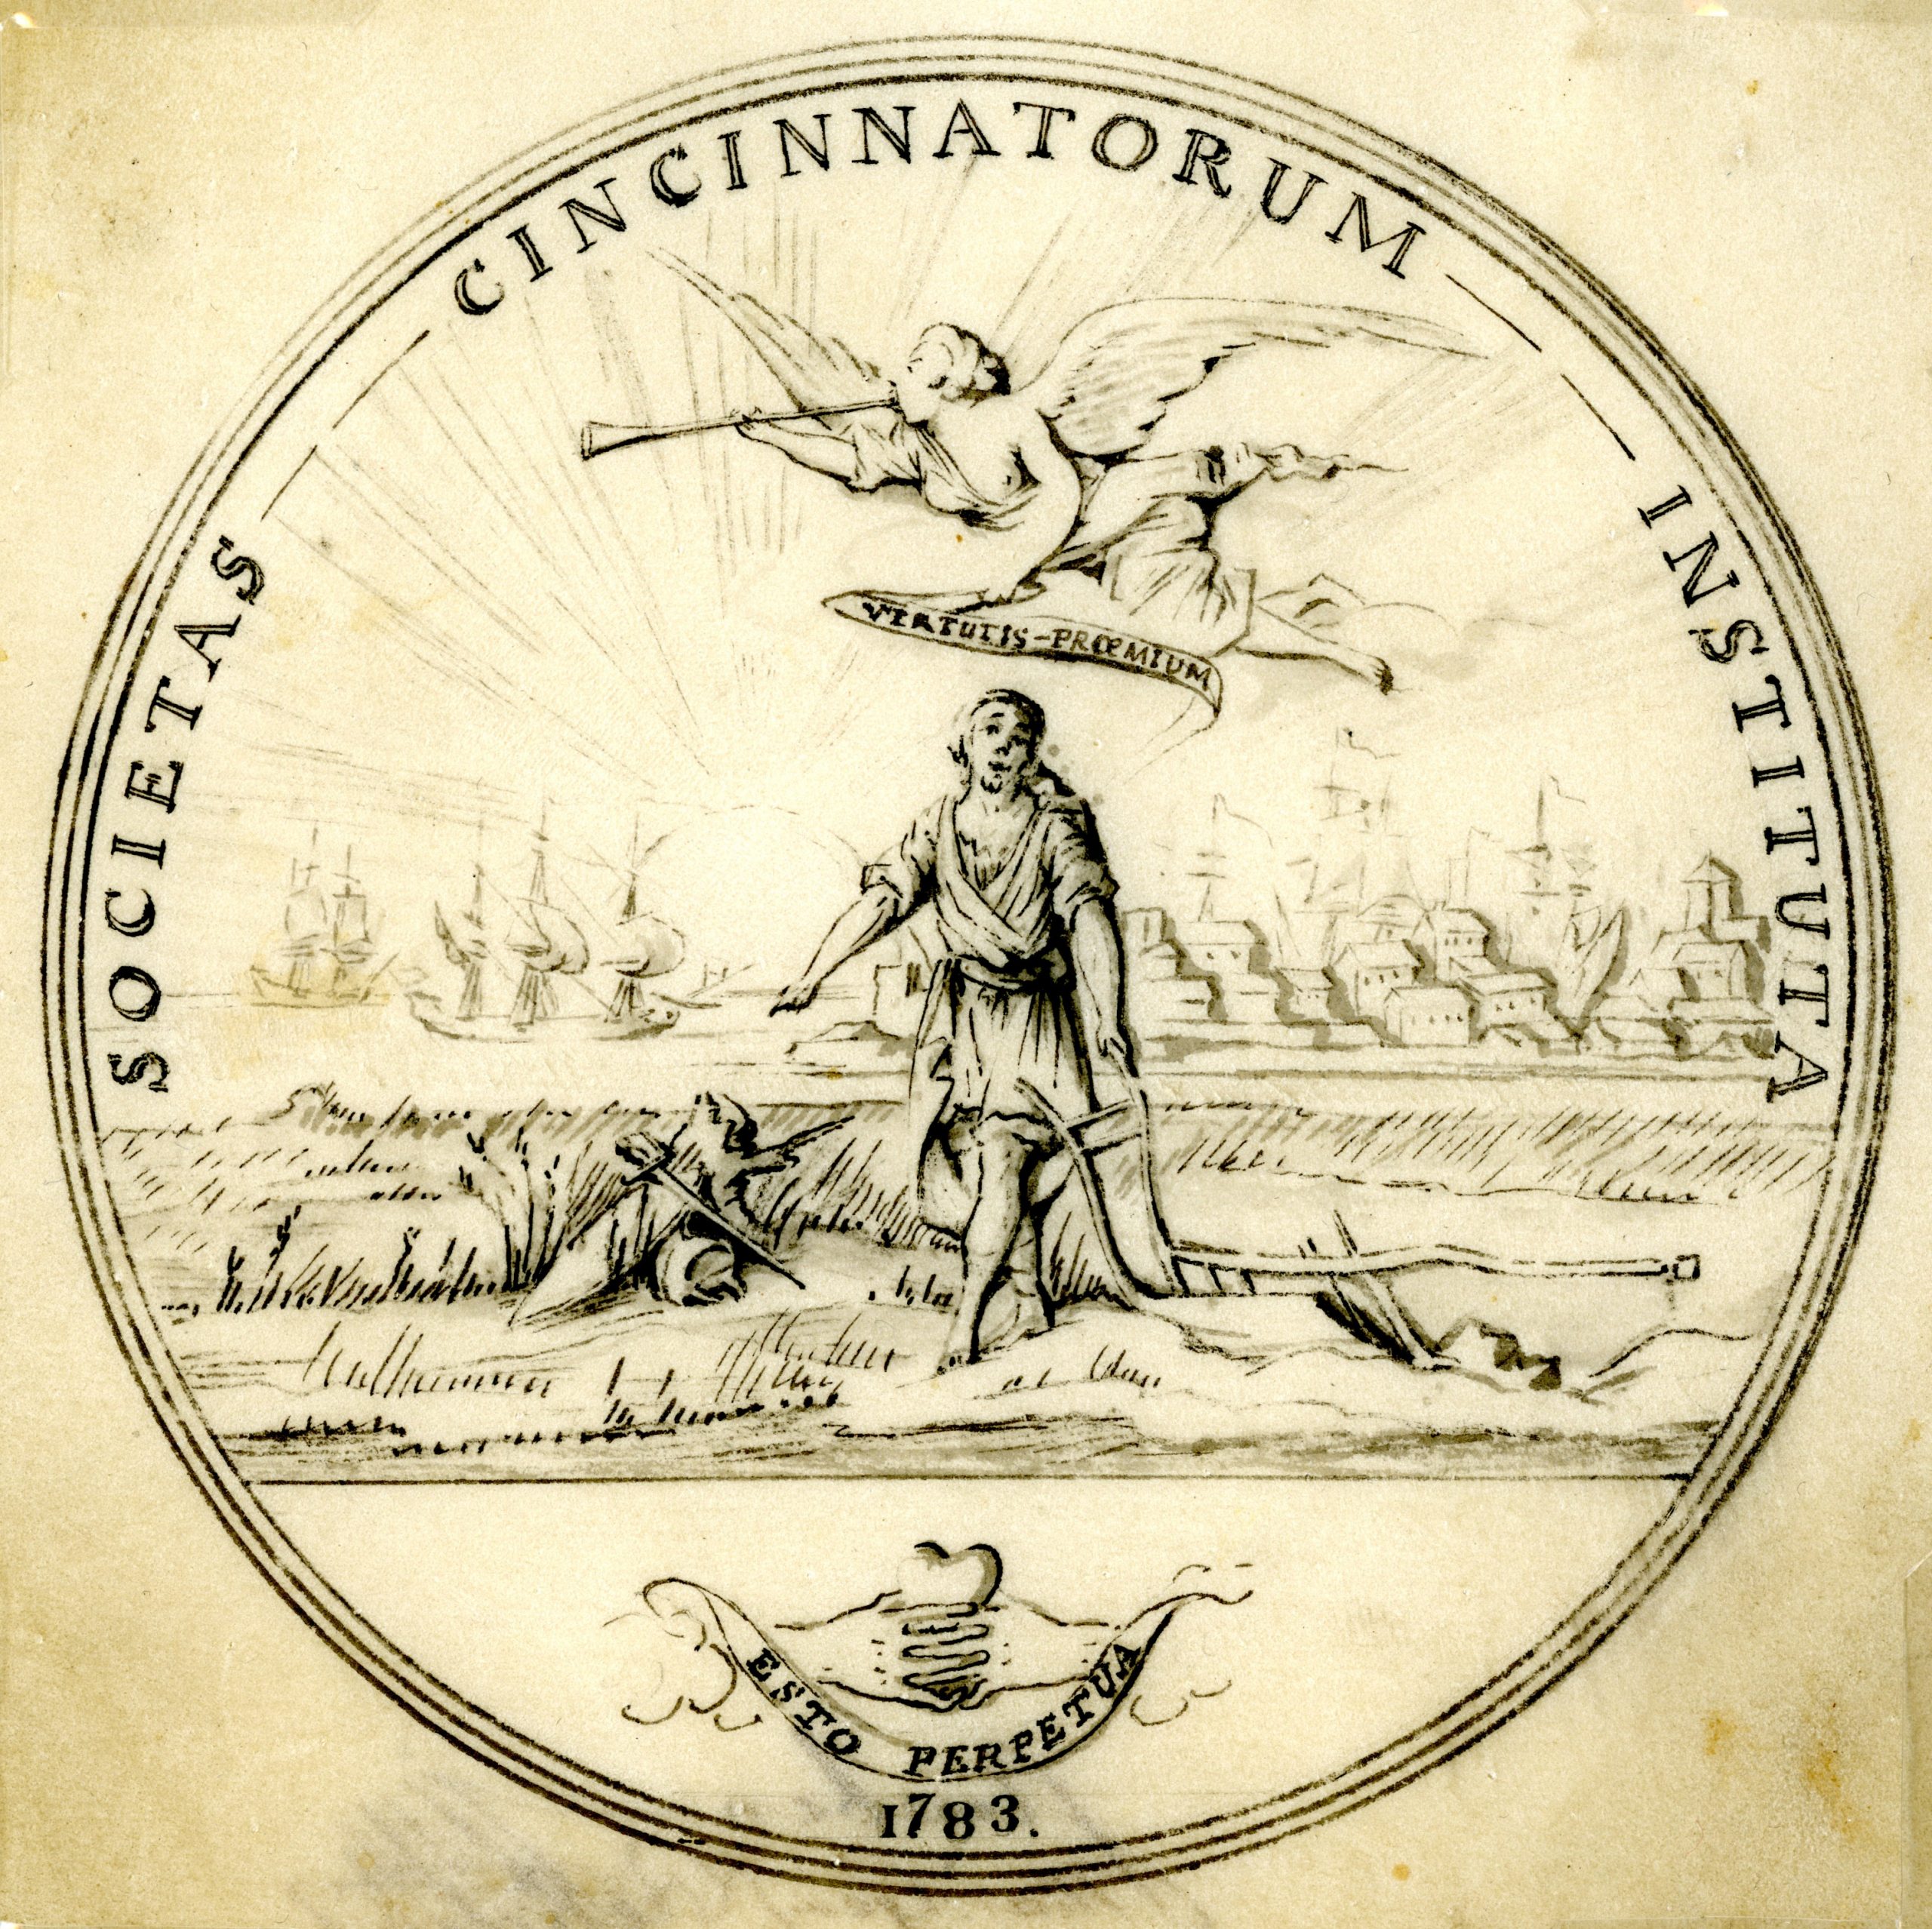 Sketch of the reverse of the Society of the Cincinnati medal